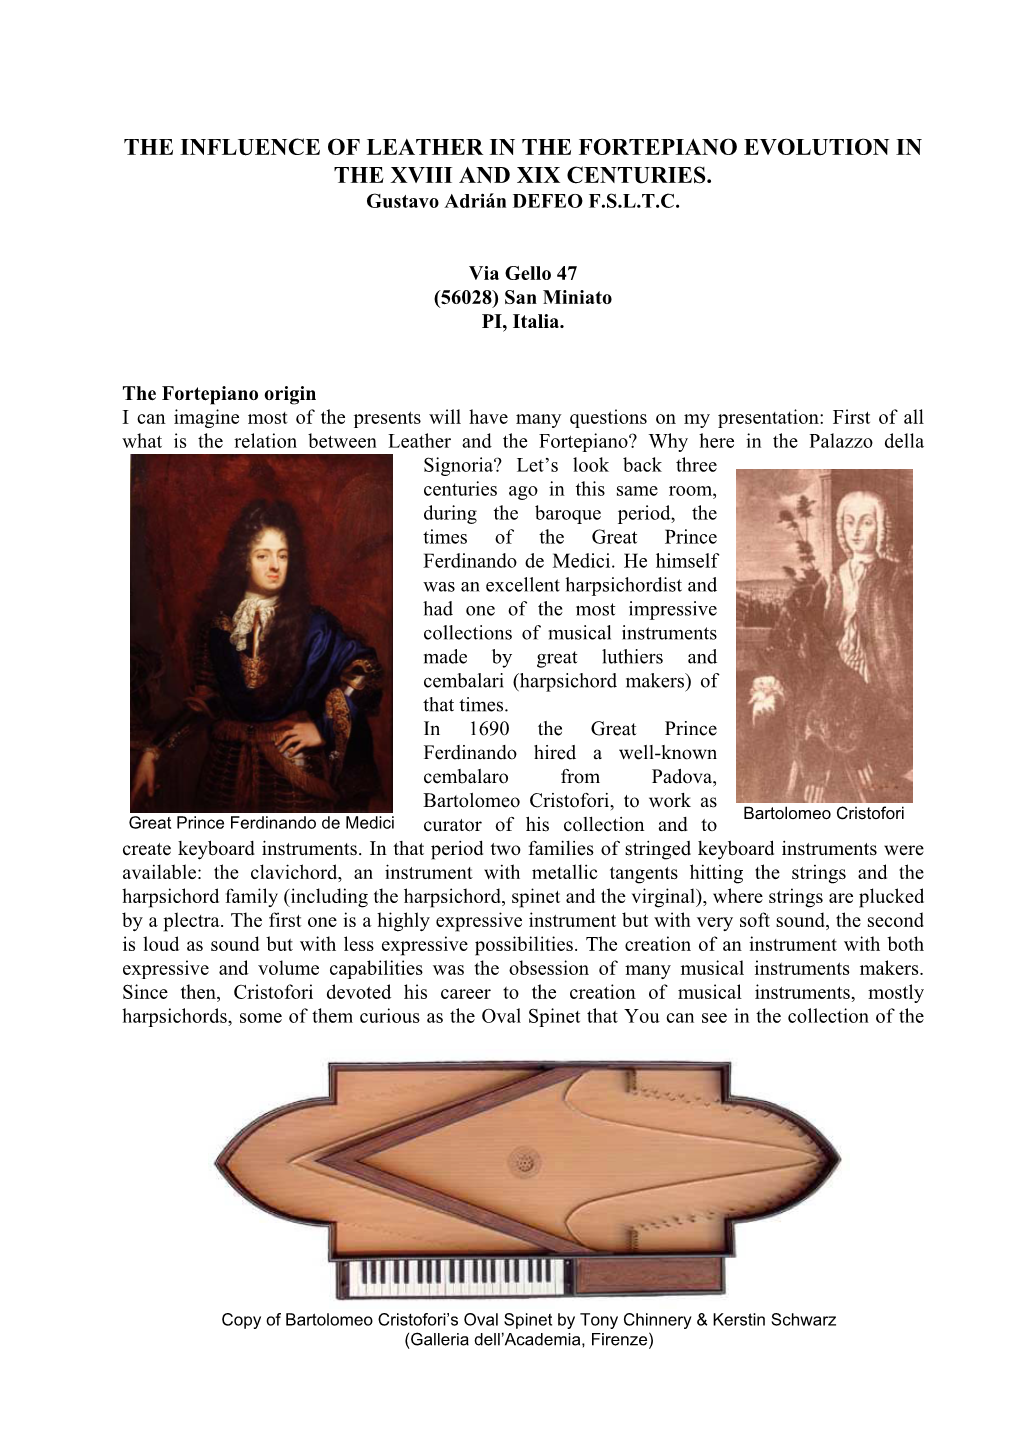 THE INFLUENCE of LEATHER in the FORTEPIANO EVOLUTION in the XVIII and XIX CENTURIES. Gustavo Adrián DEFEO F.S.L.T.C